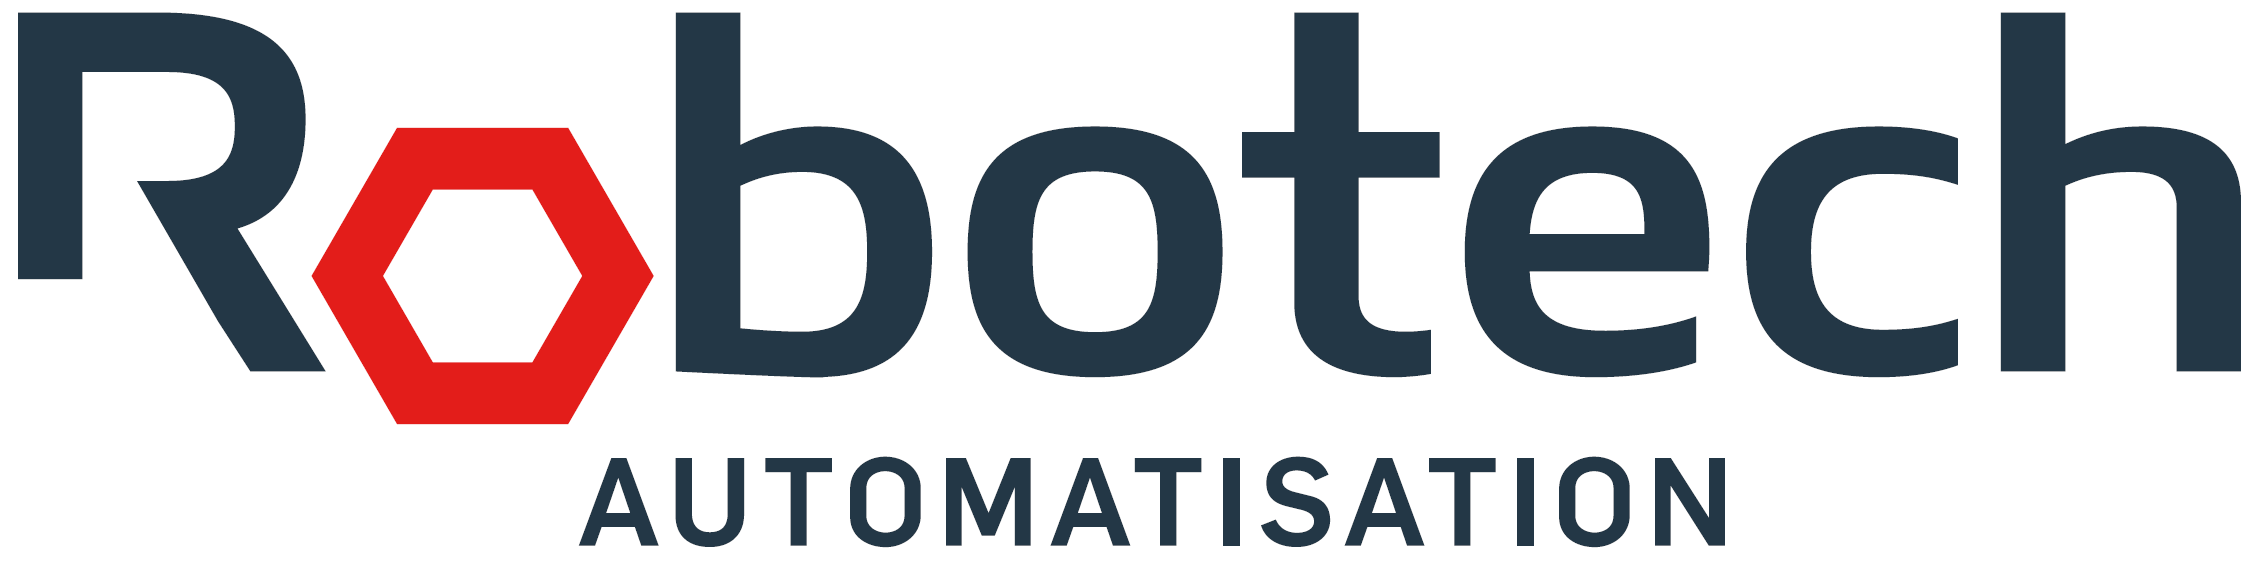 Robotech Automatisation  case study opens in a new tab